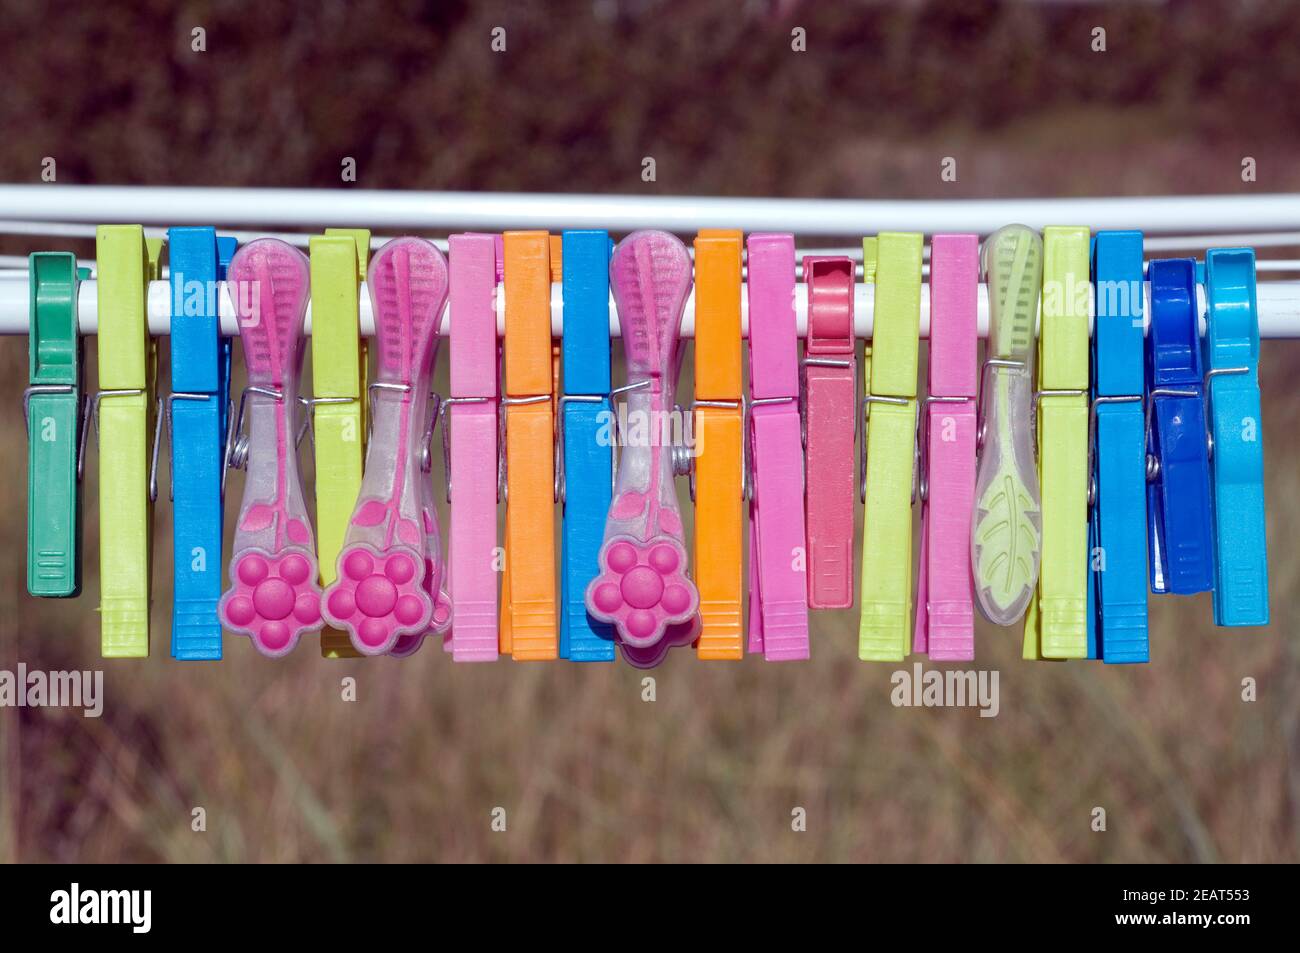 Farbenspiel High Resolution Stock Photography and Images - Alamy